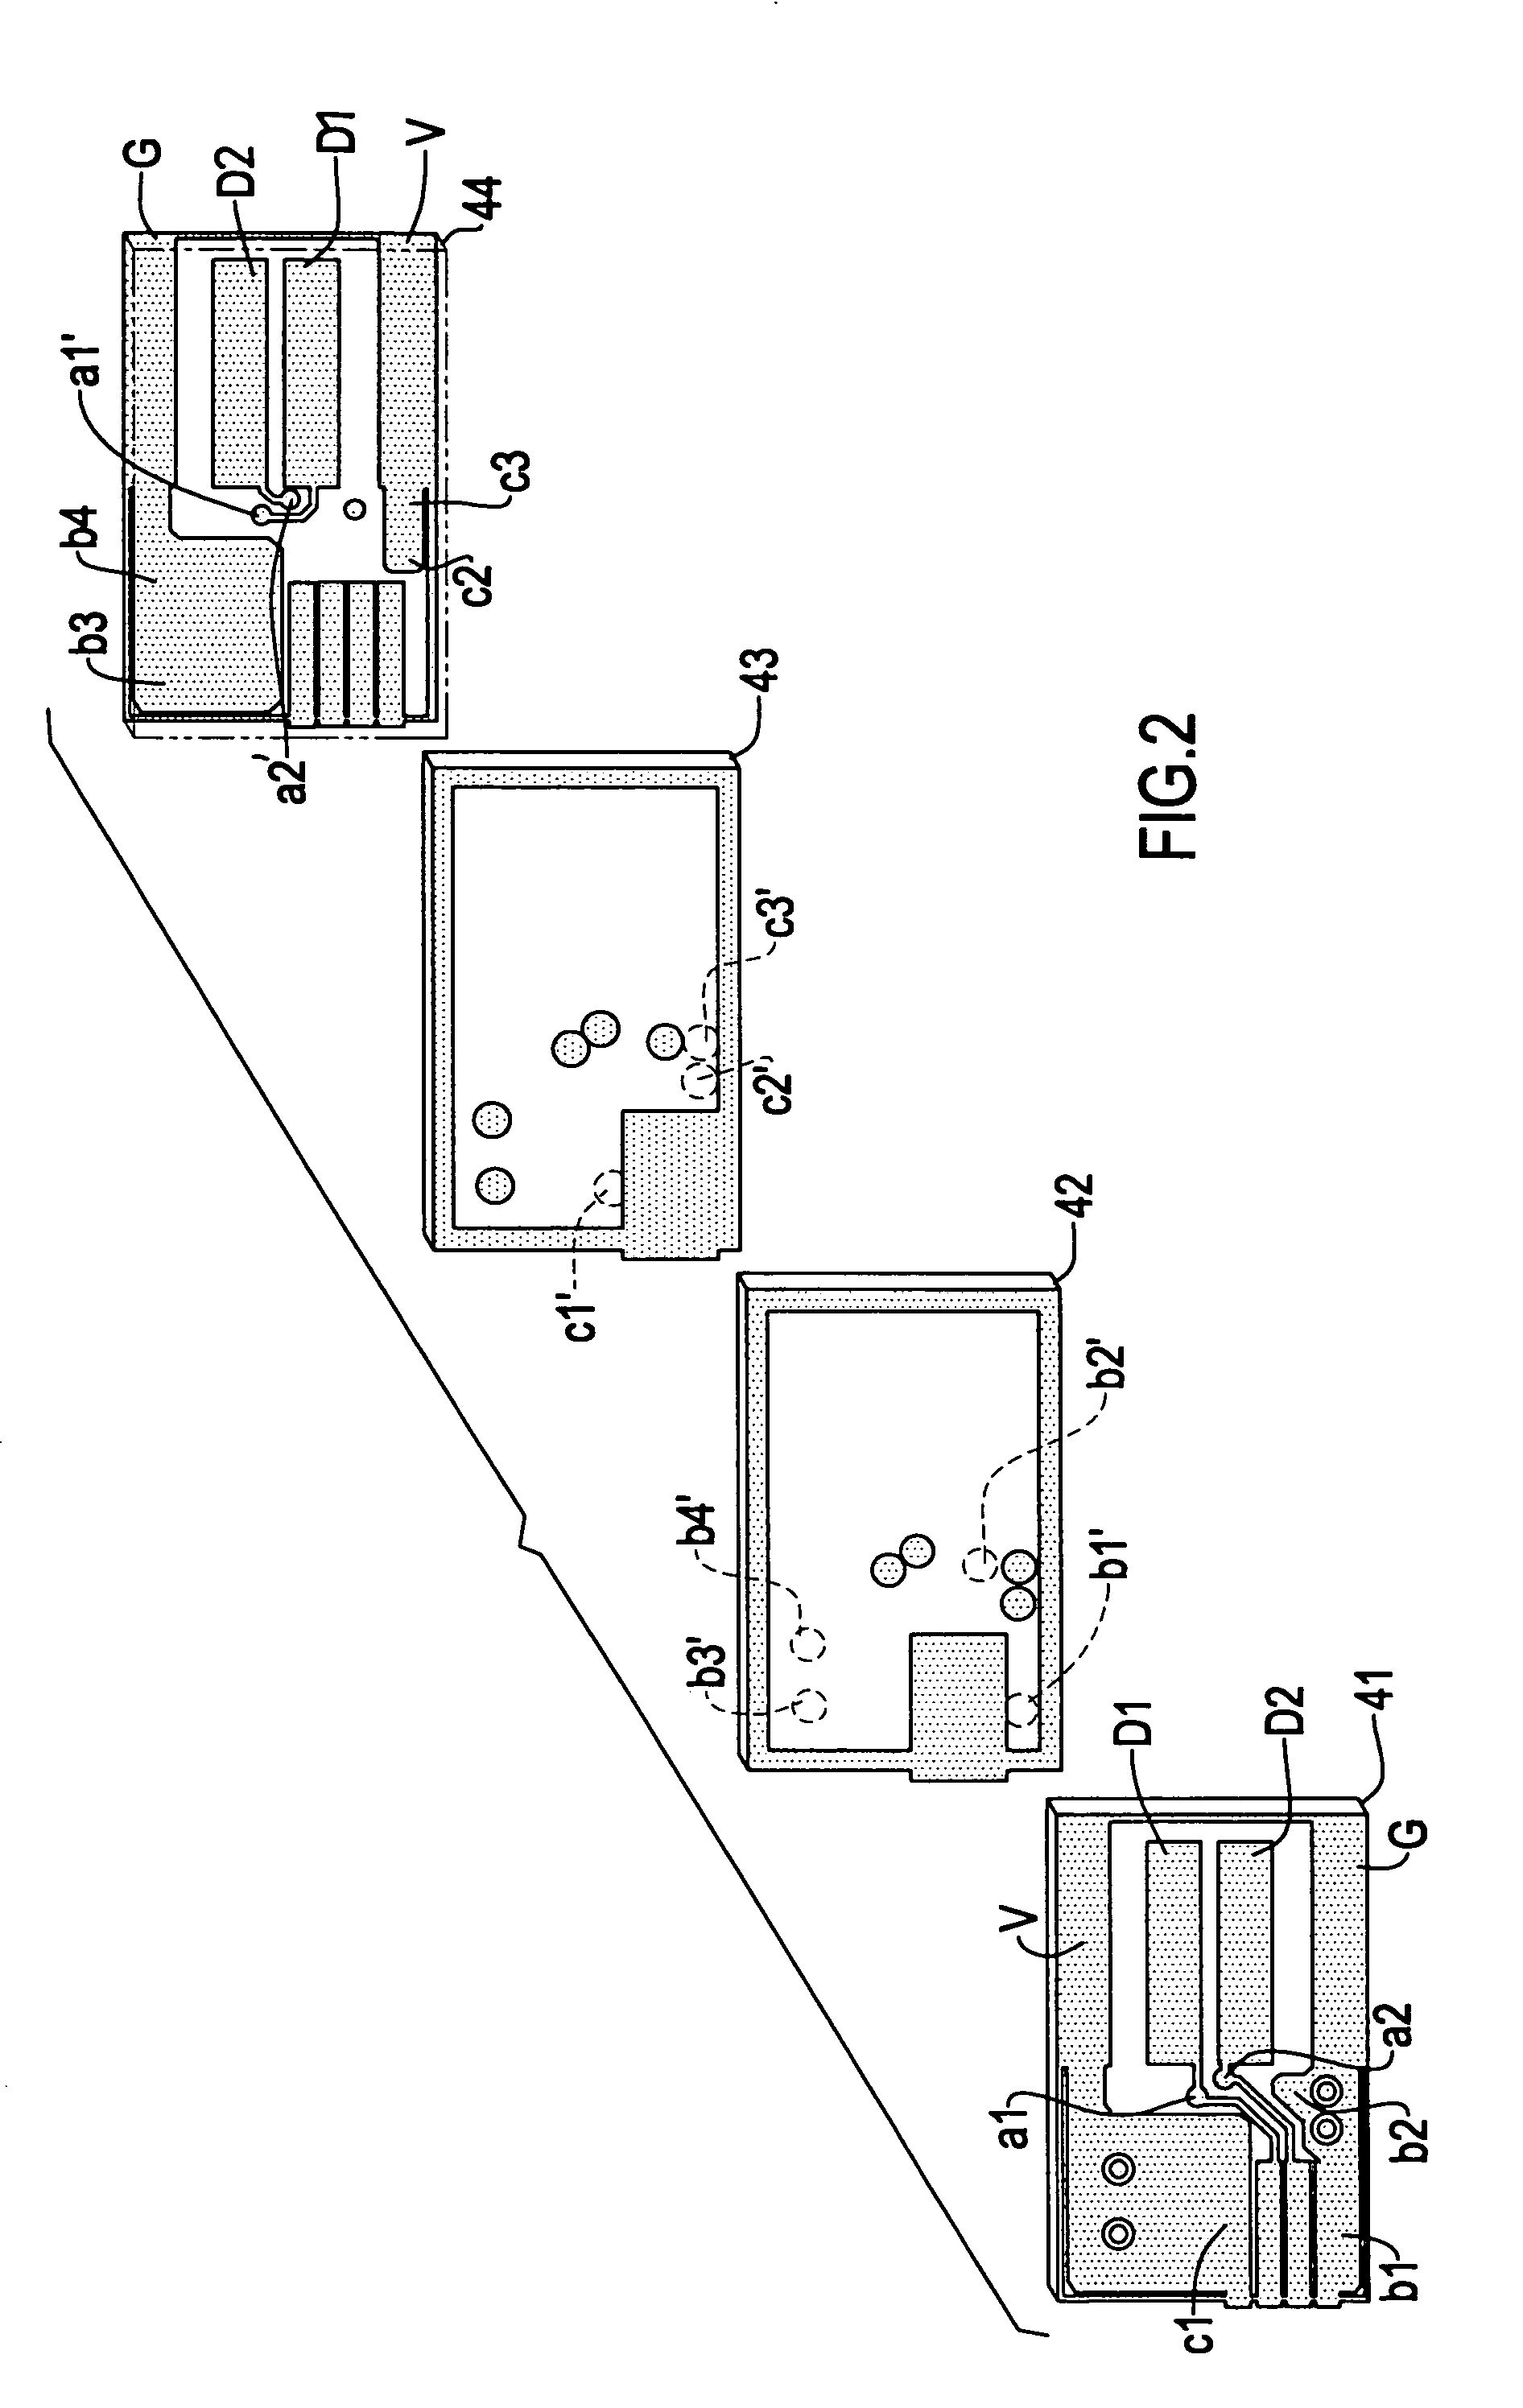 USB plug with two sides alternately connectable to a USB port